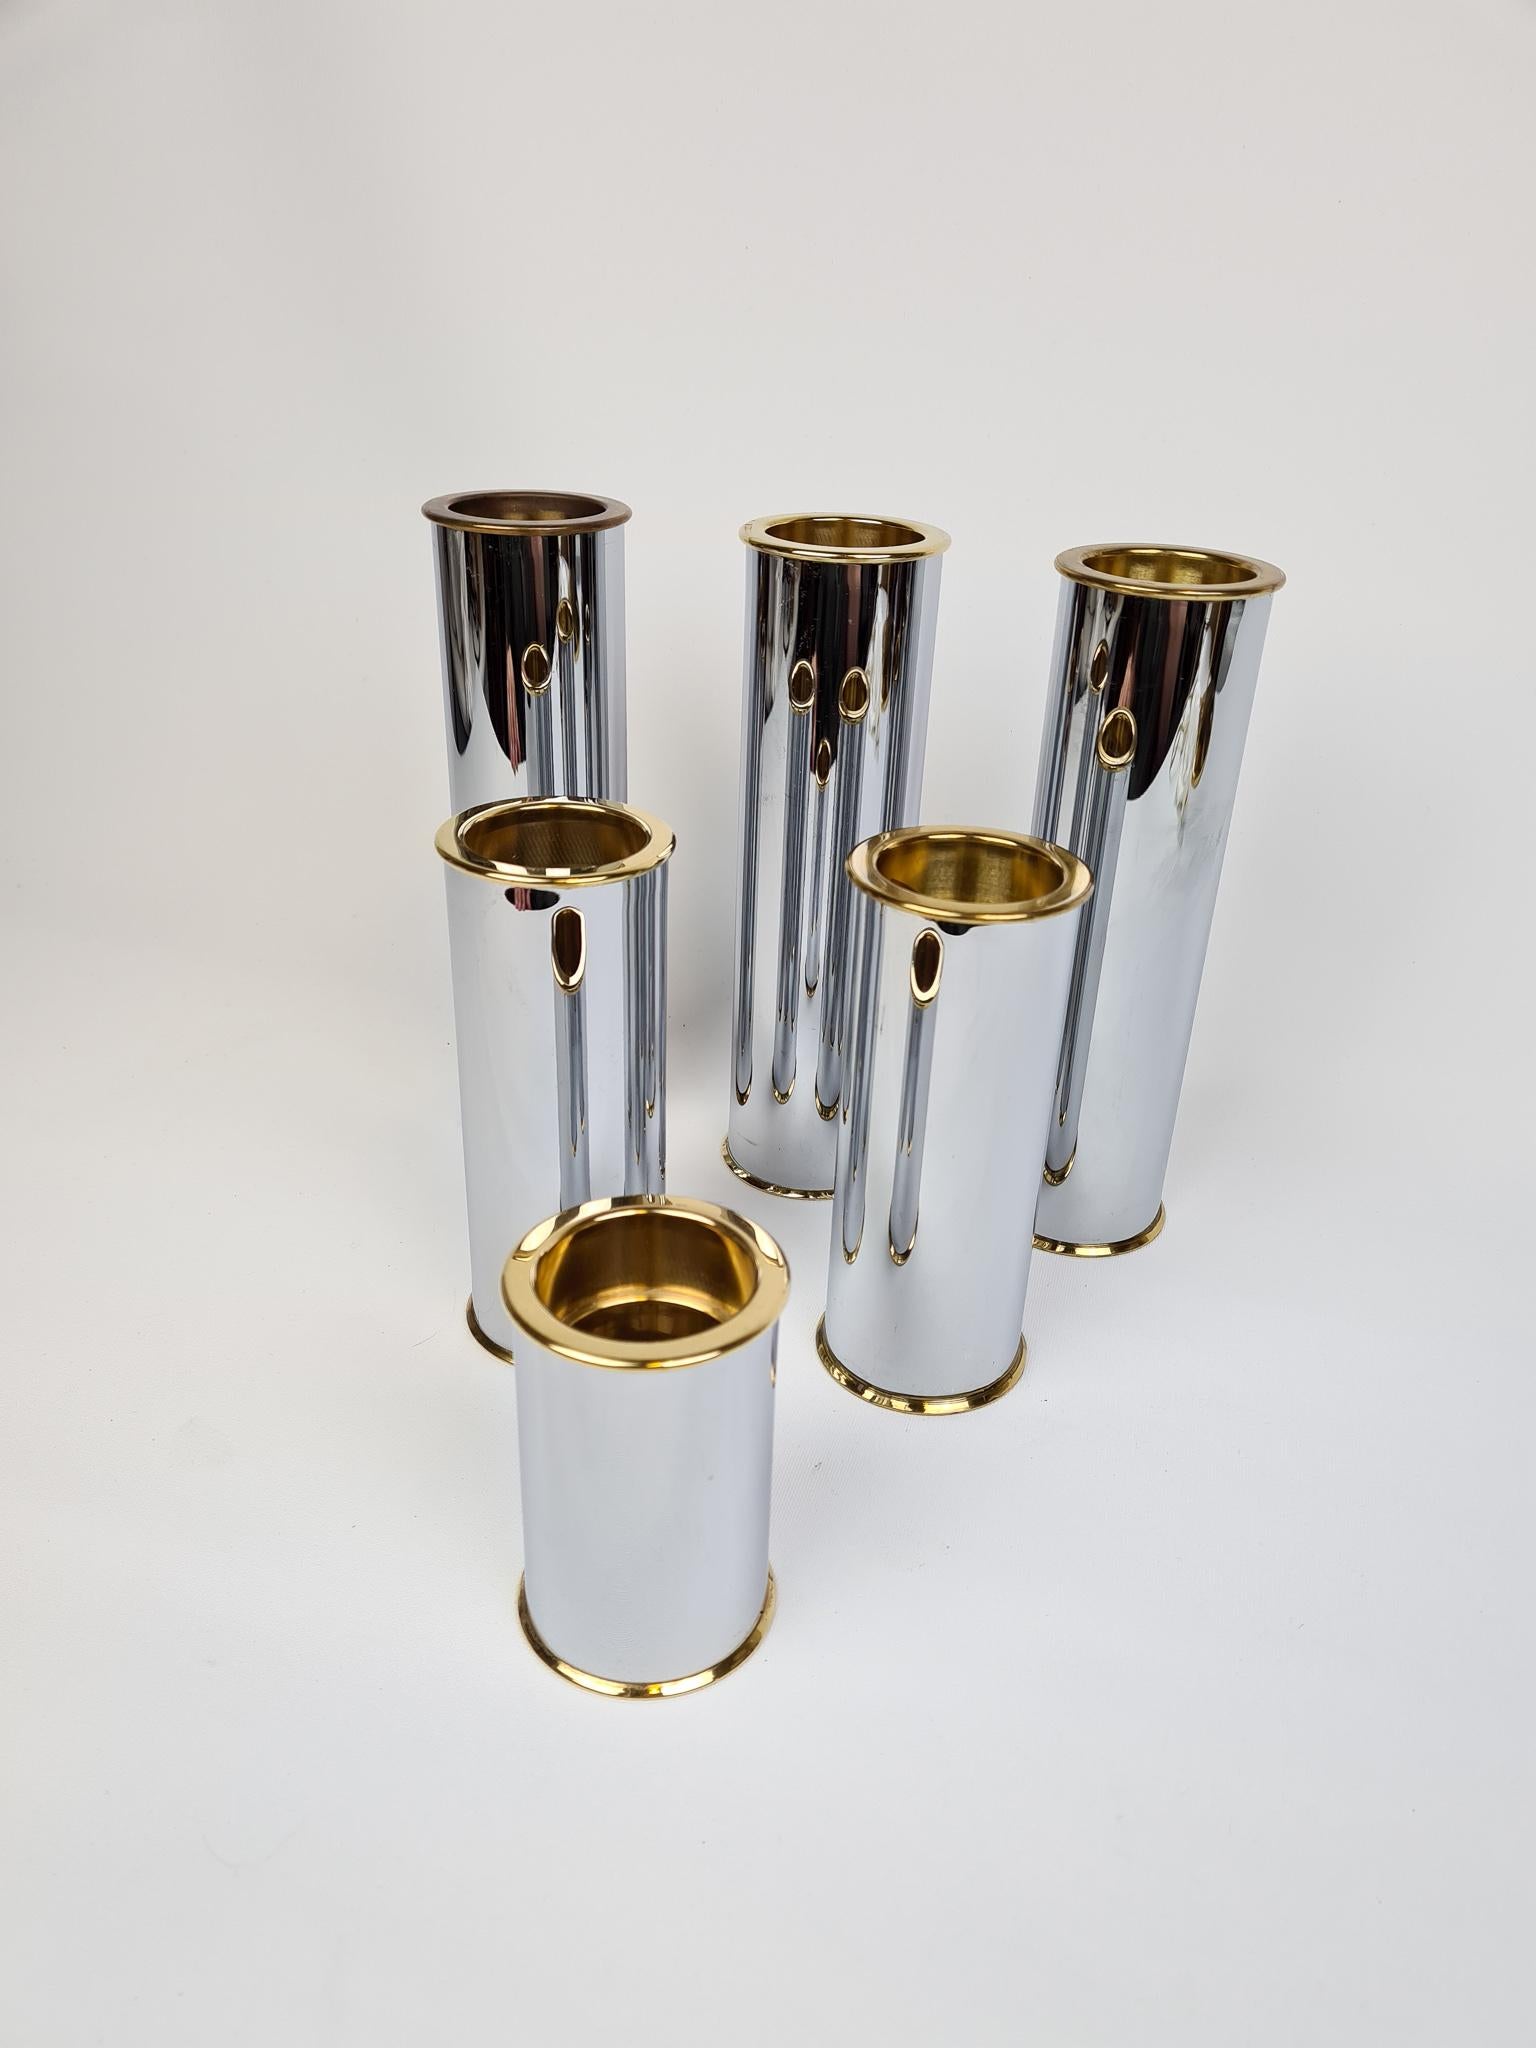 Late 20th Century Swedish Modern Candelholders in Brass and Steel, Englesson, Sweden, 1970s For Sale